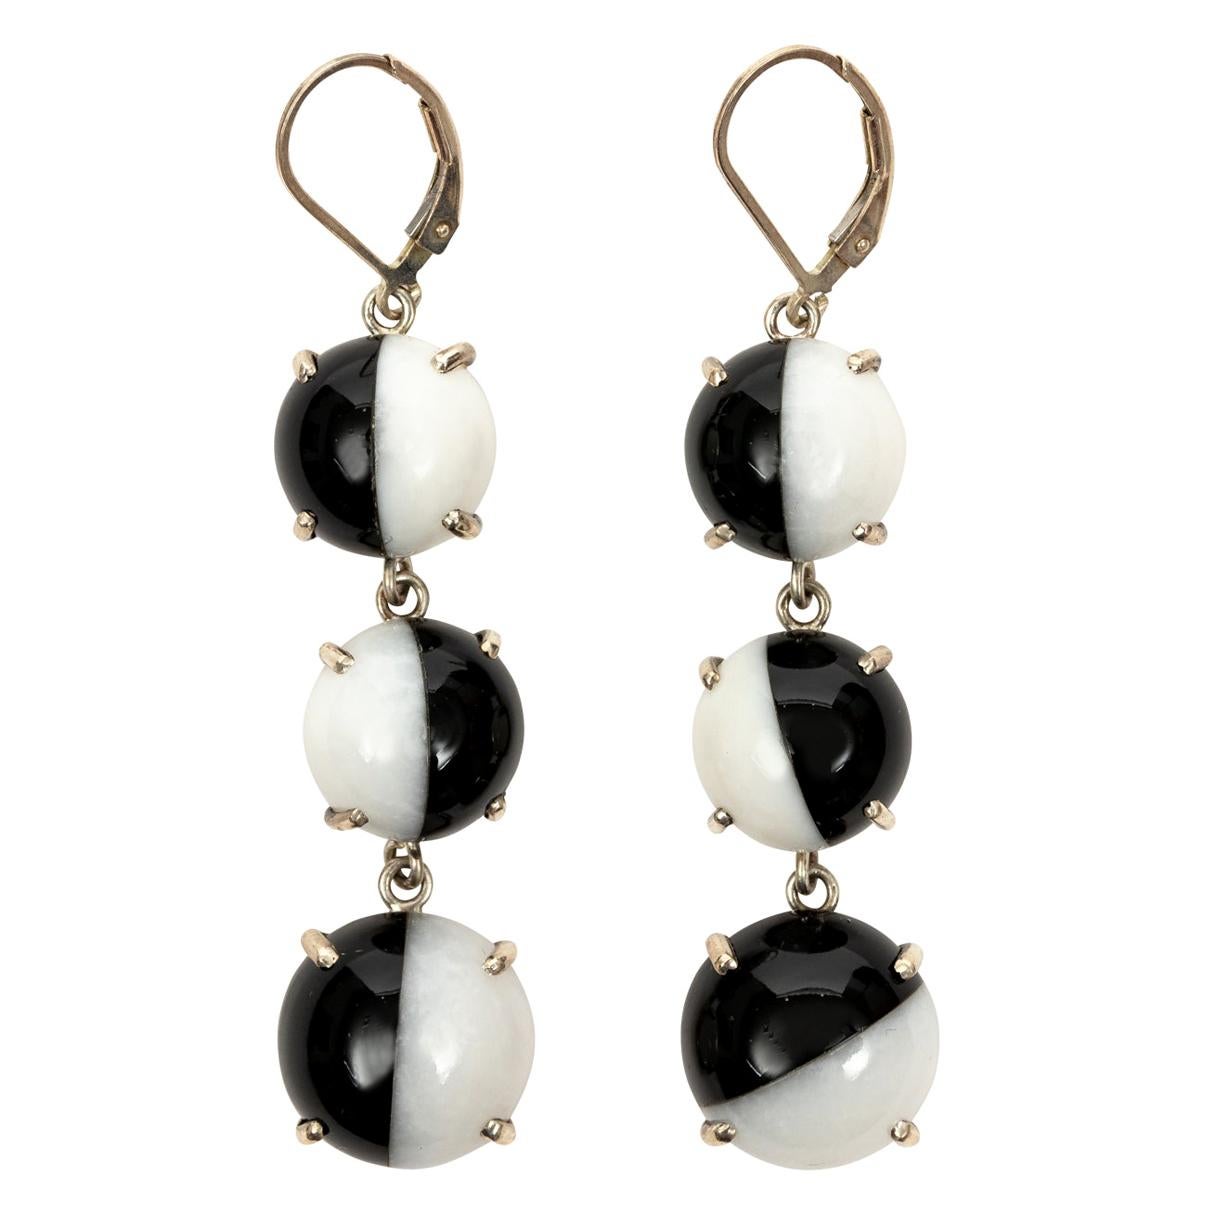 Pair of Black and White Onyx Split Cabochon Disc Earrings Titled "Black n' White For Sale